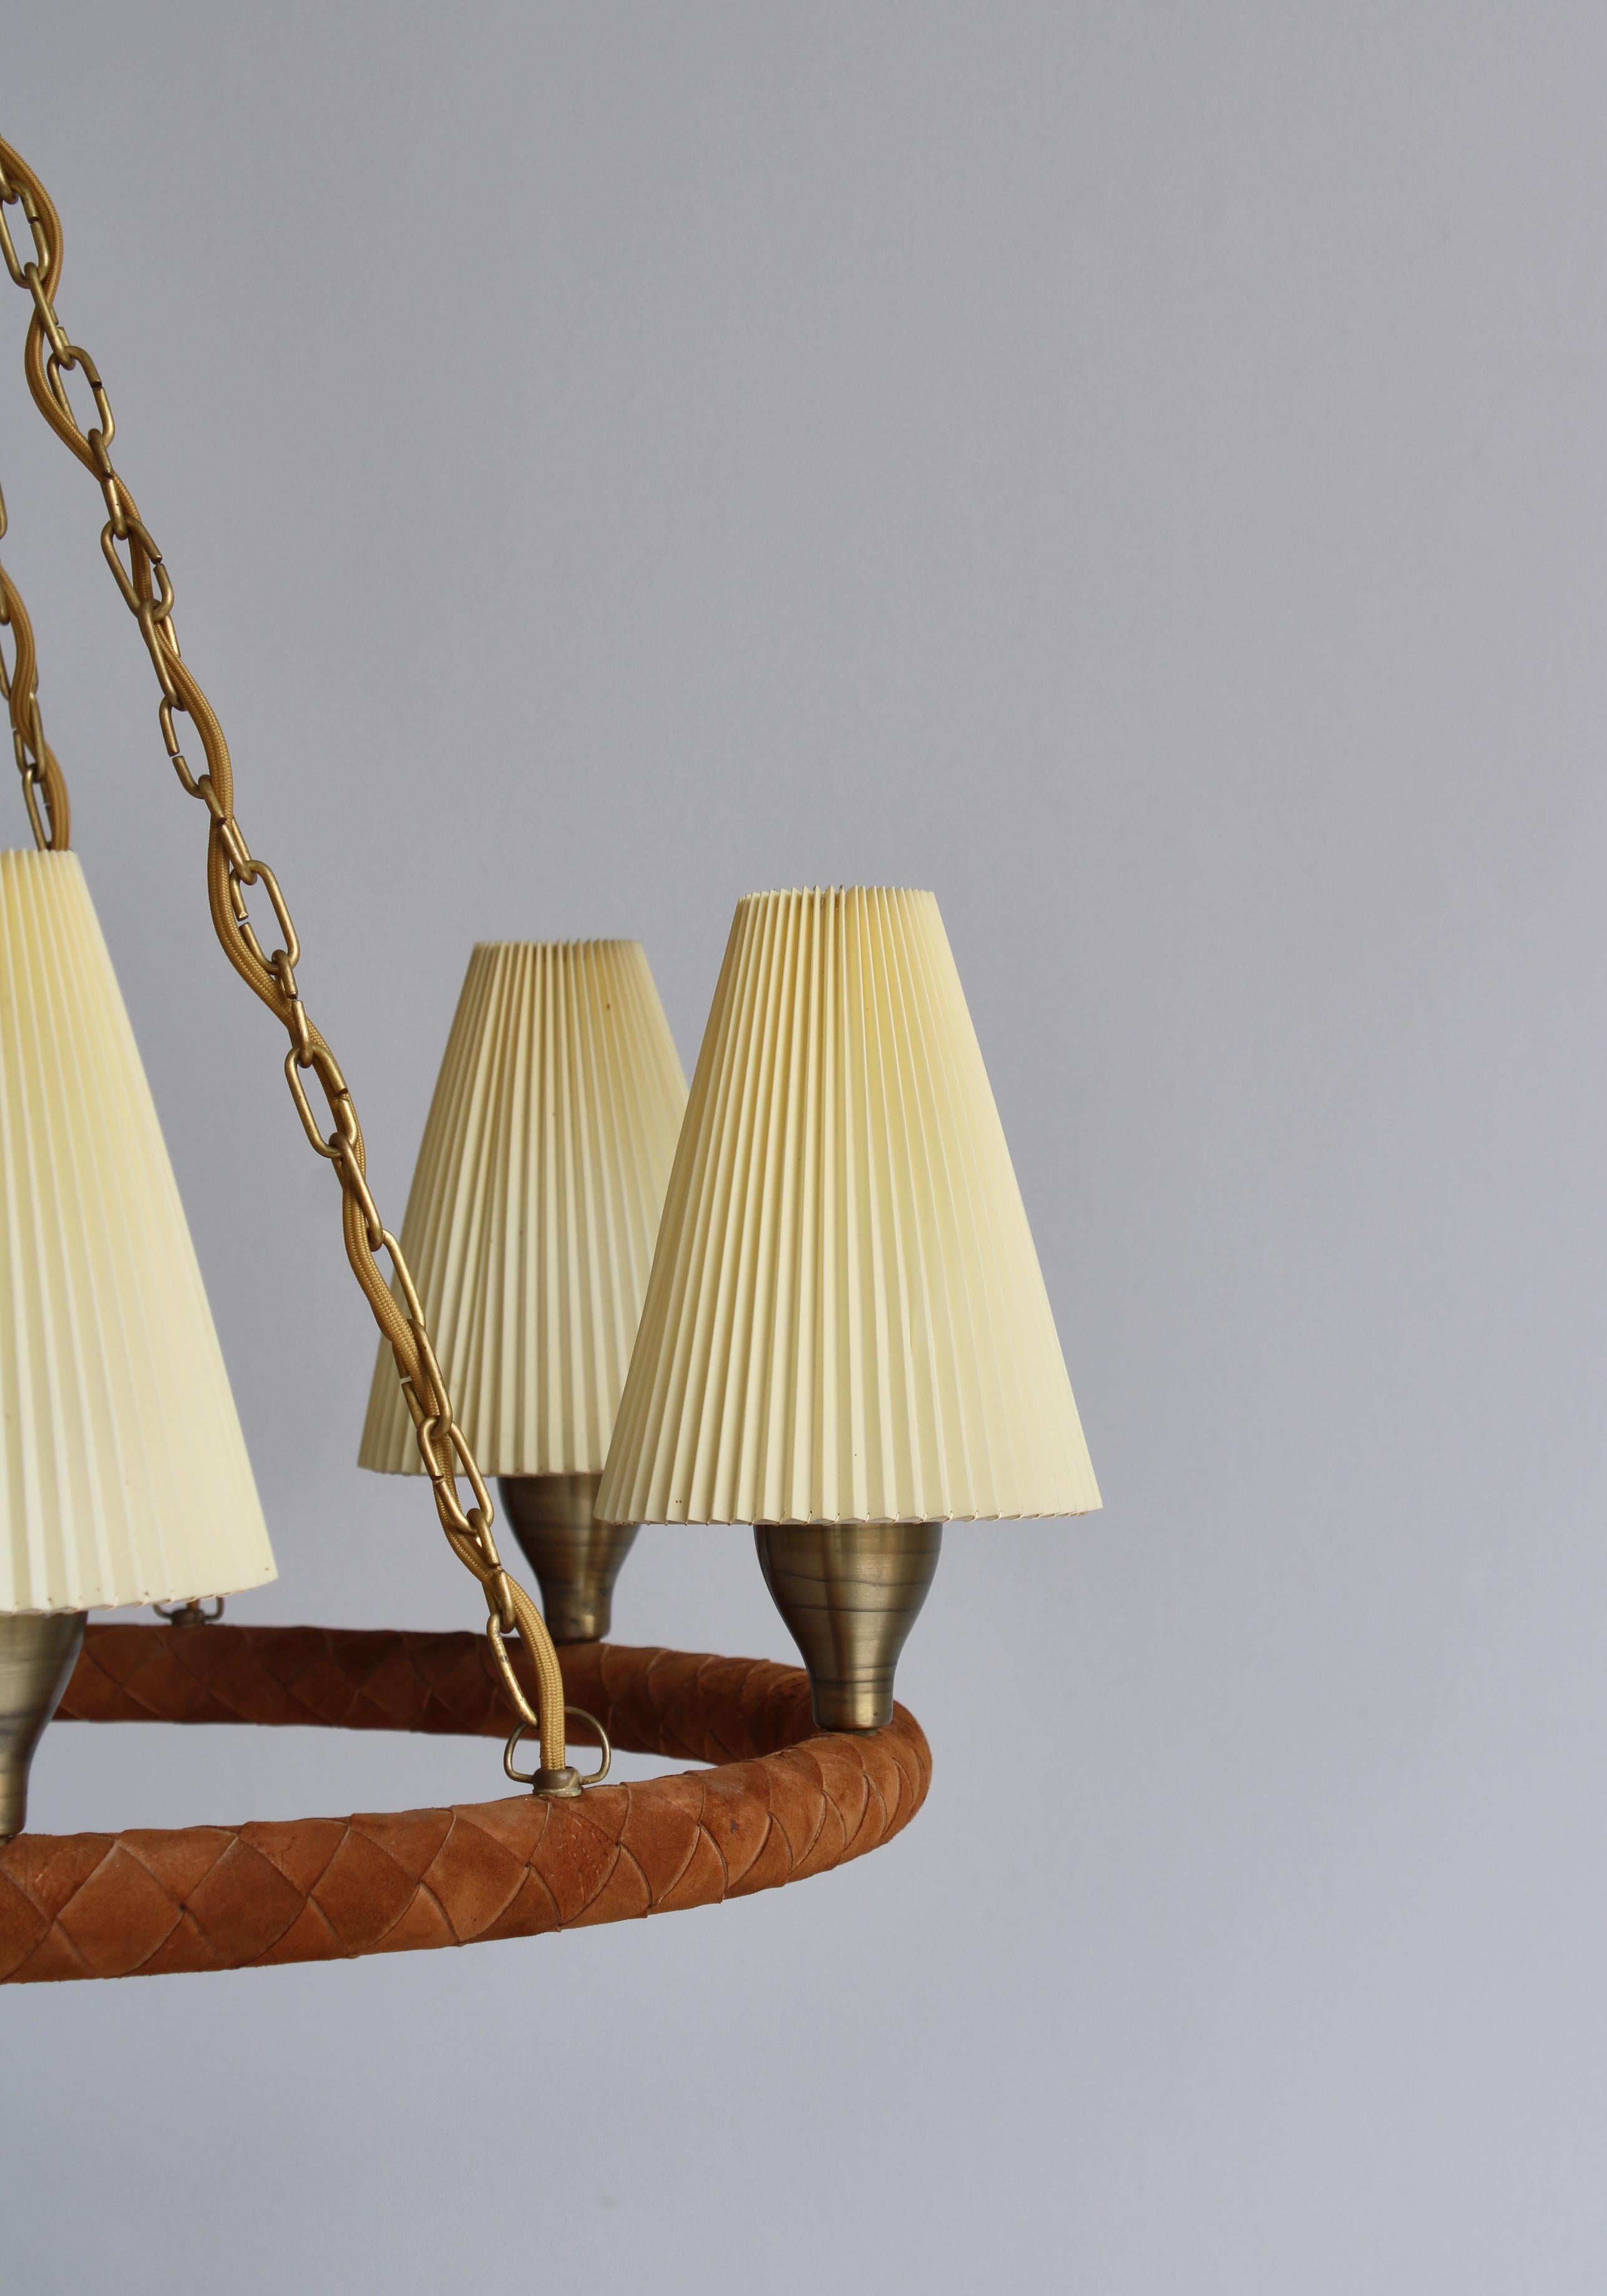 Danish Modern Chandelier in Leather, Brass and Glass by LYFA, Denmark, 1940s For Sale 4